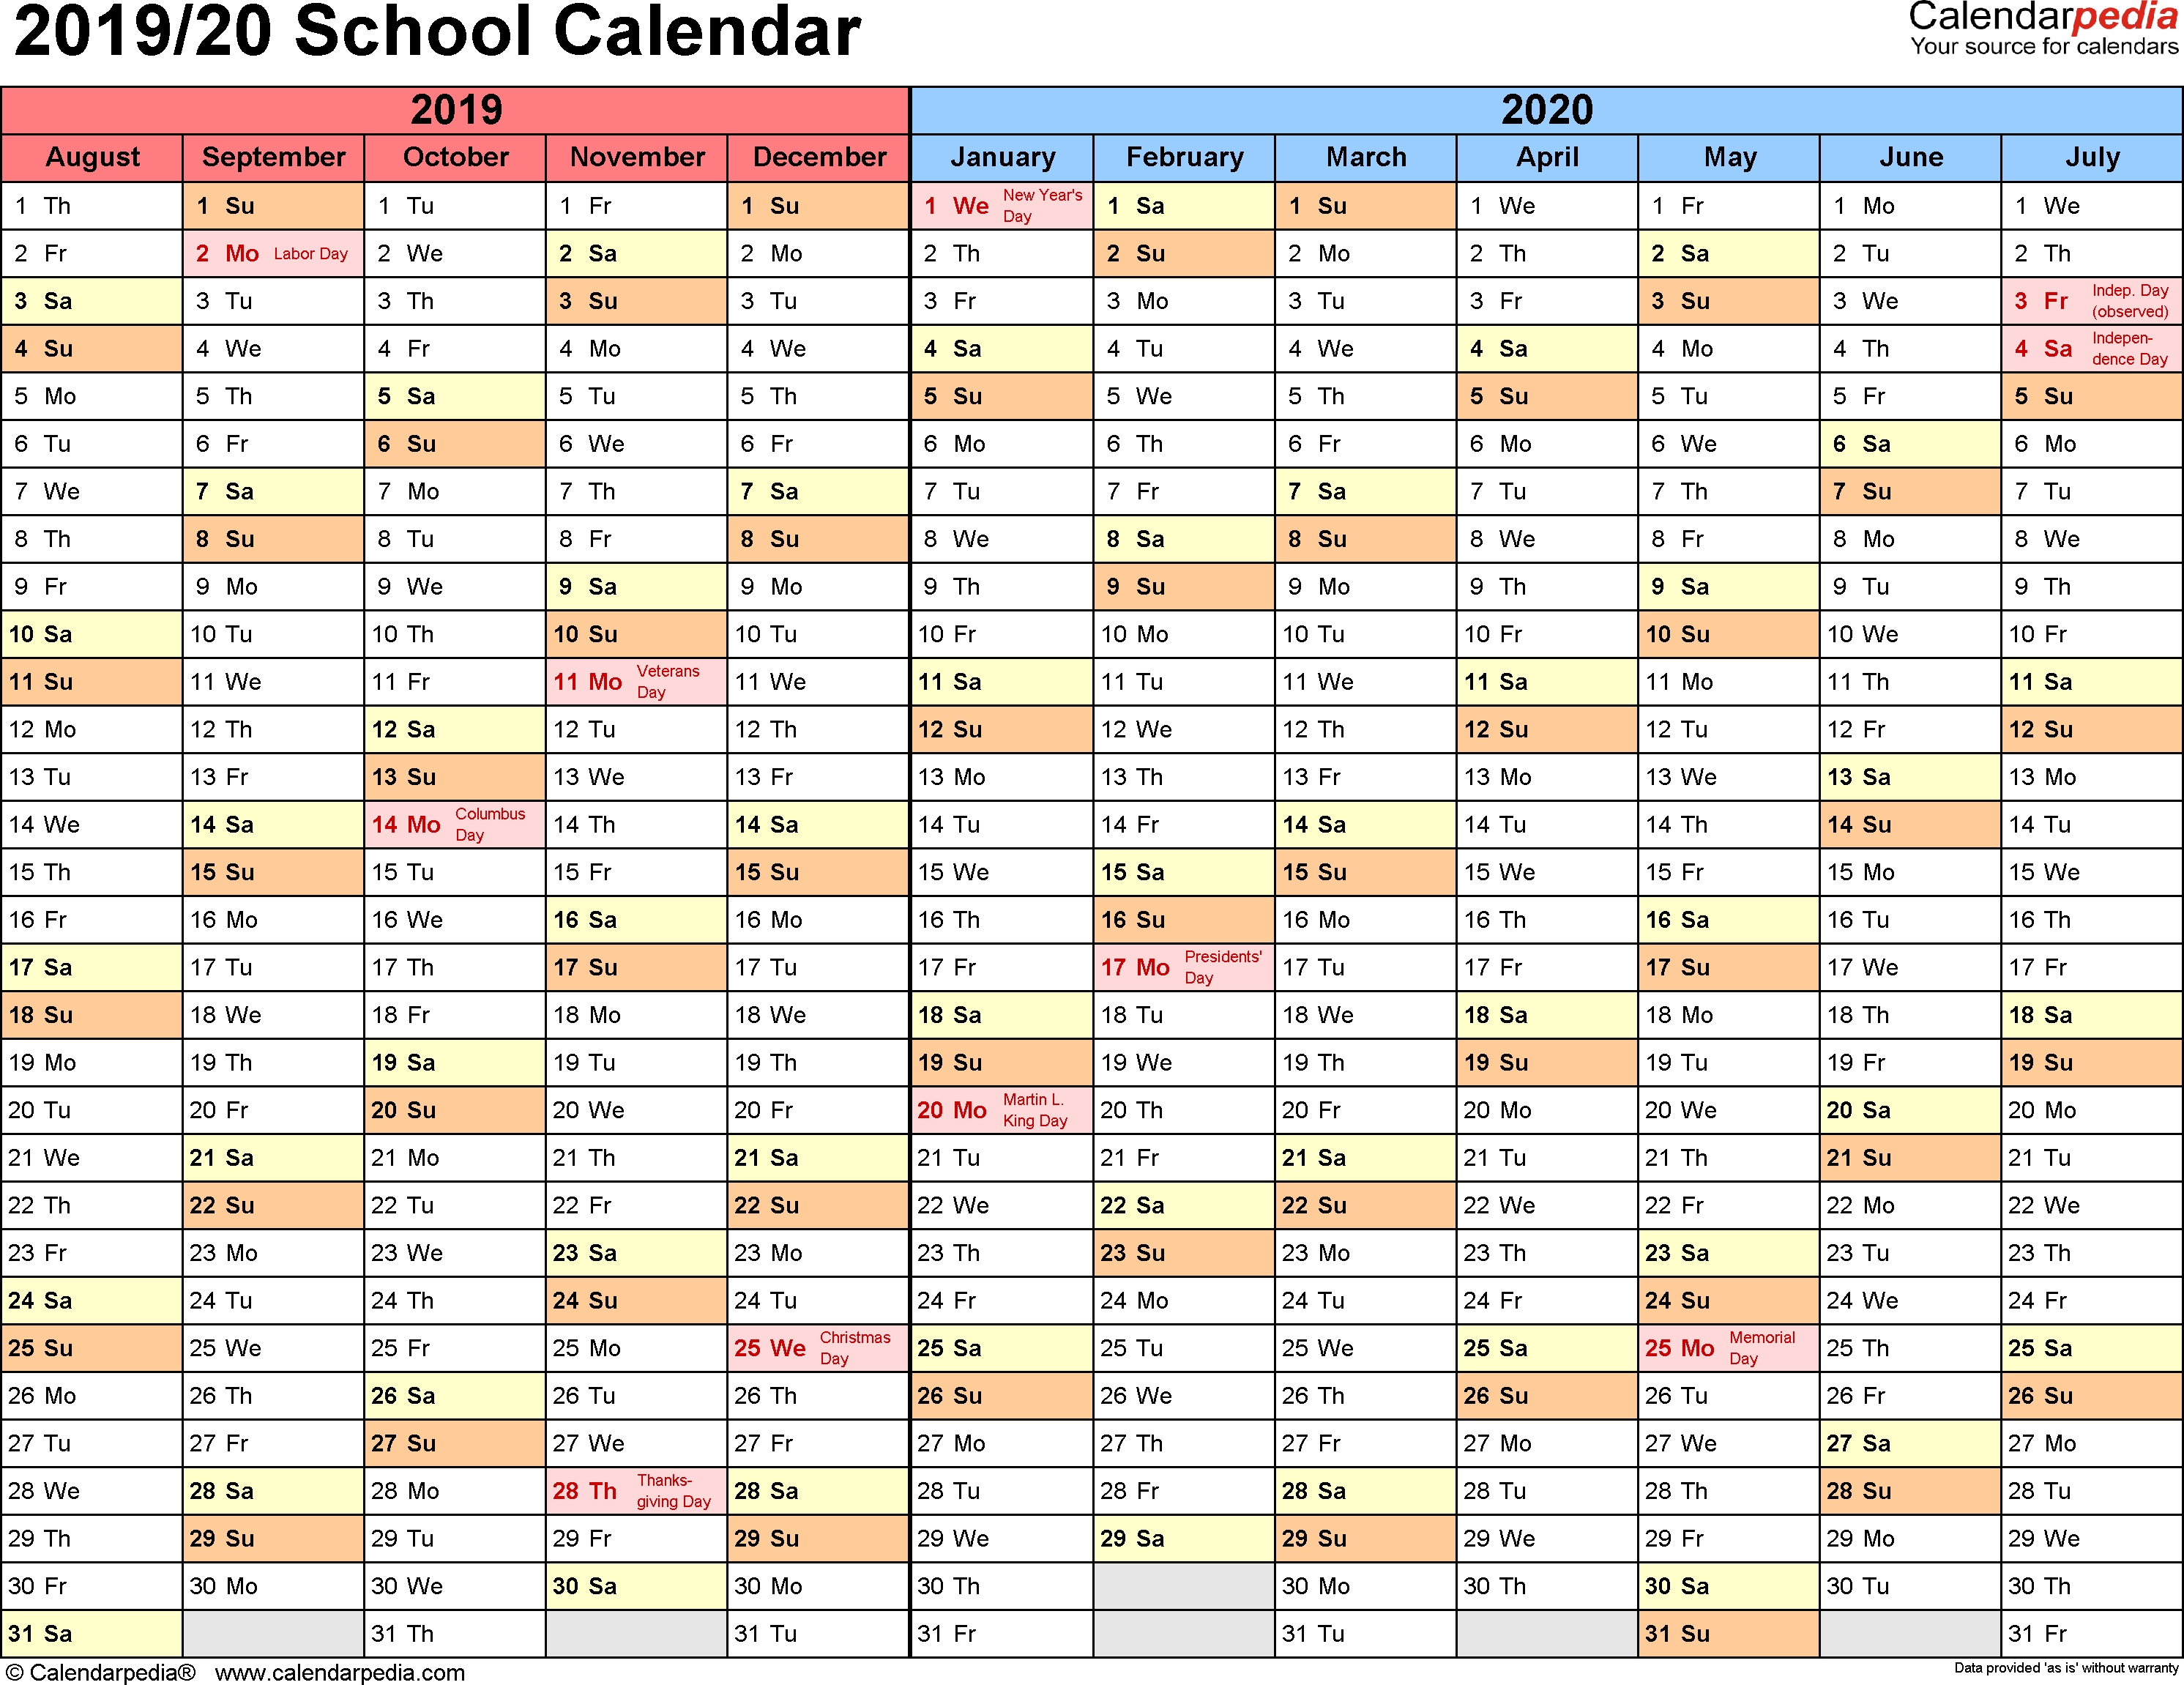 School Calendars 2019/2020 As Free Printable Pdf Templates with regard to Year At A Glance Calendar School Year 2019-2020 Free Printable